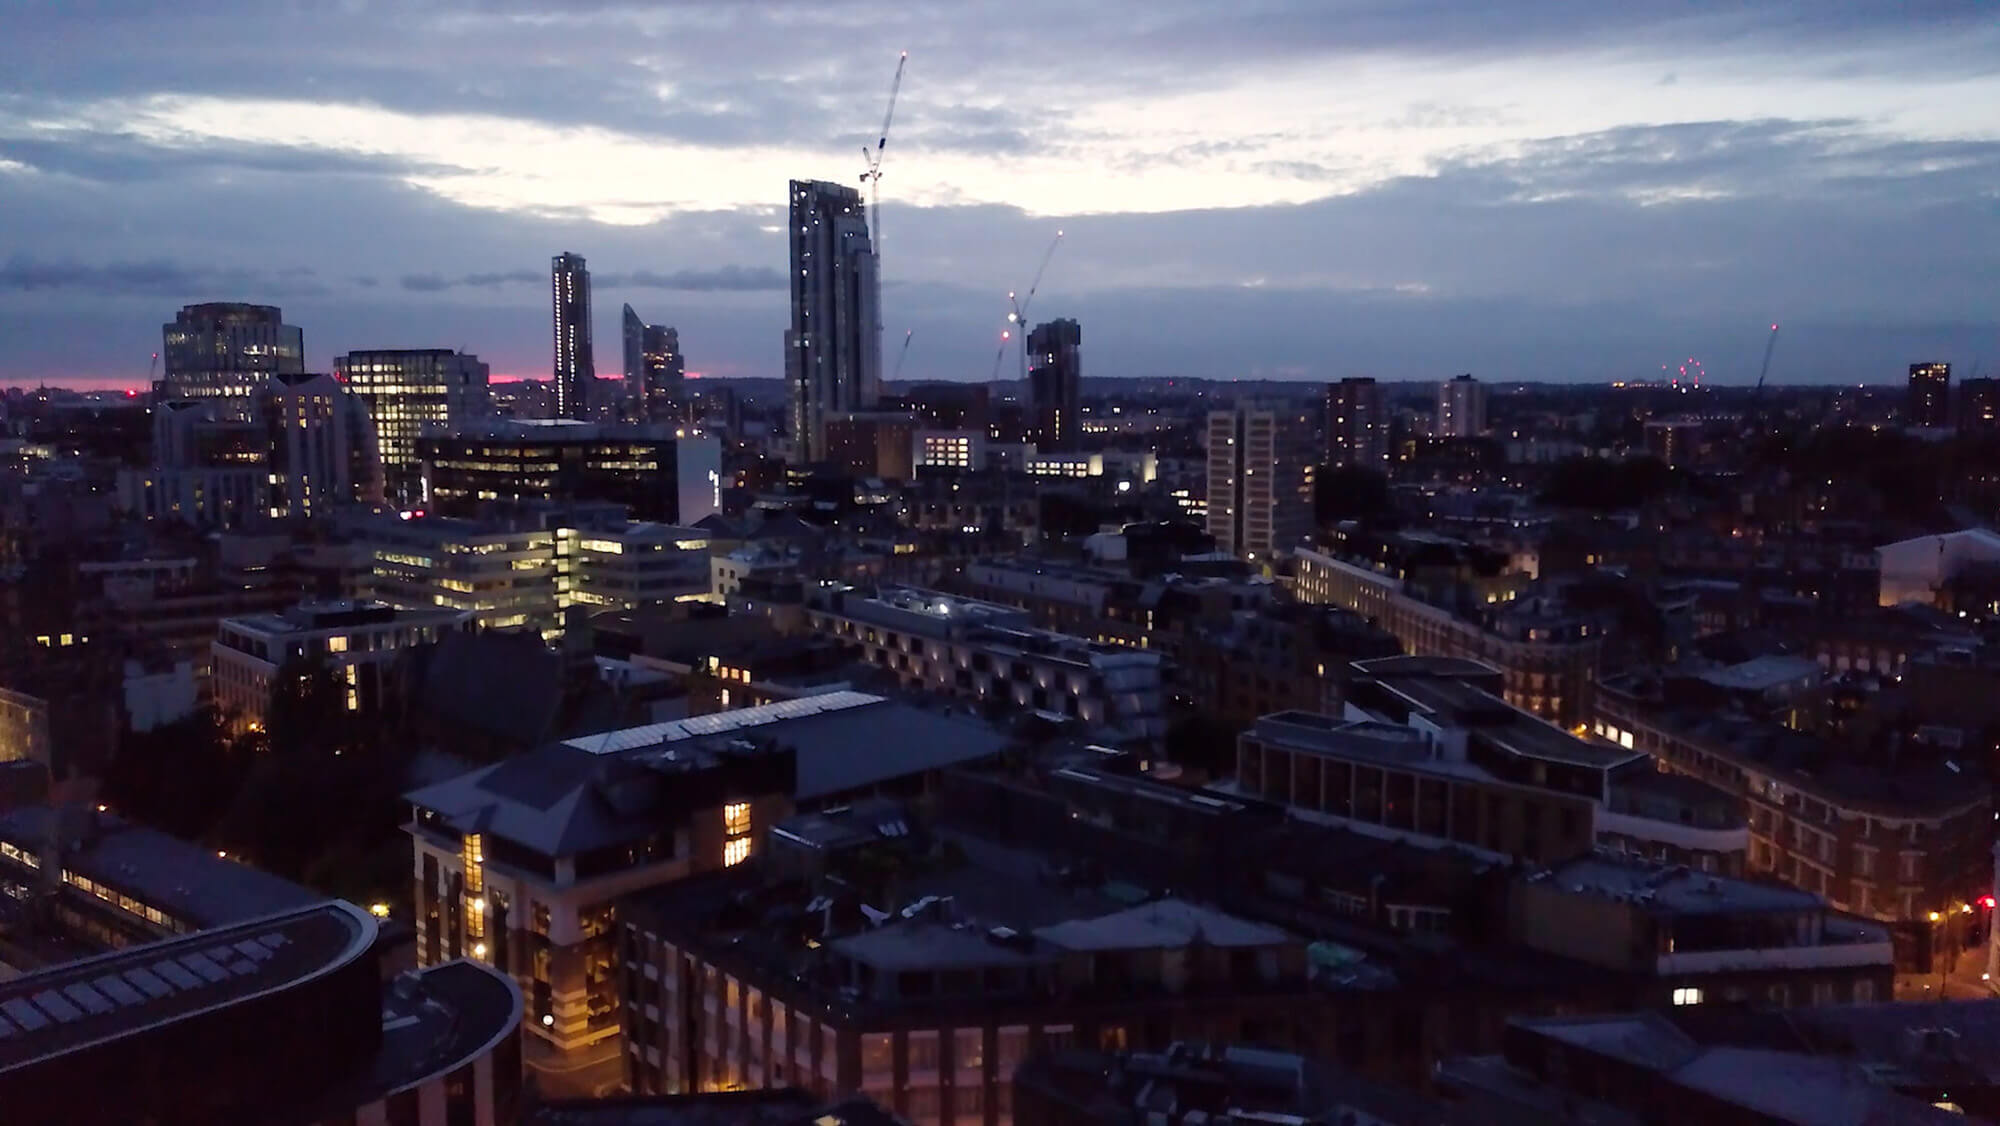 Drone shot of a city at dusk in a video for Cosmo x Lancôme's Big Summer Party, from the Rise Media case studies archive